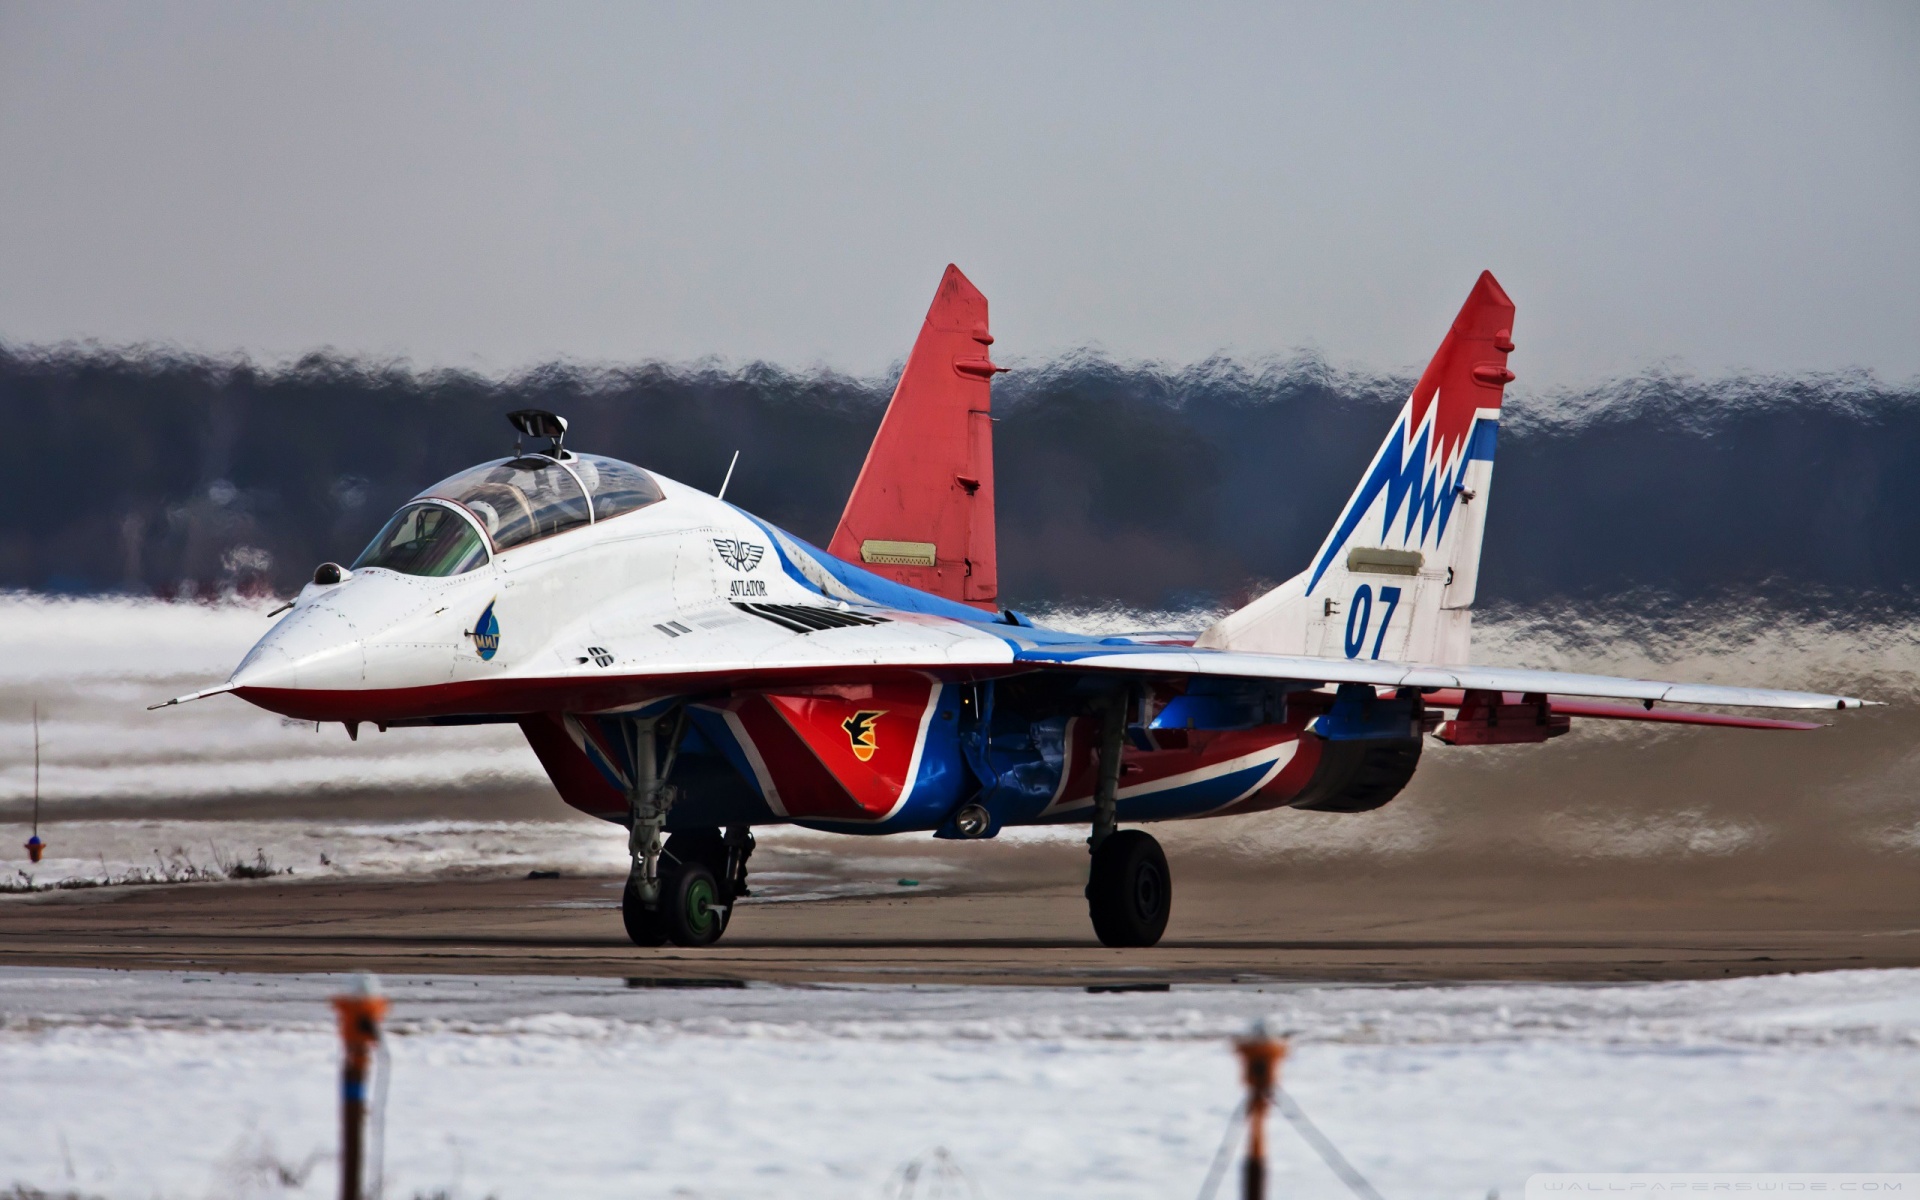 military, mikoyan mig 29, air force, aircraft, jet fighter, warplane, jet fighters